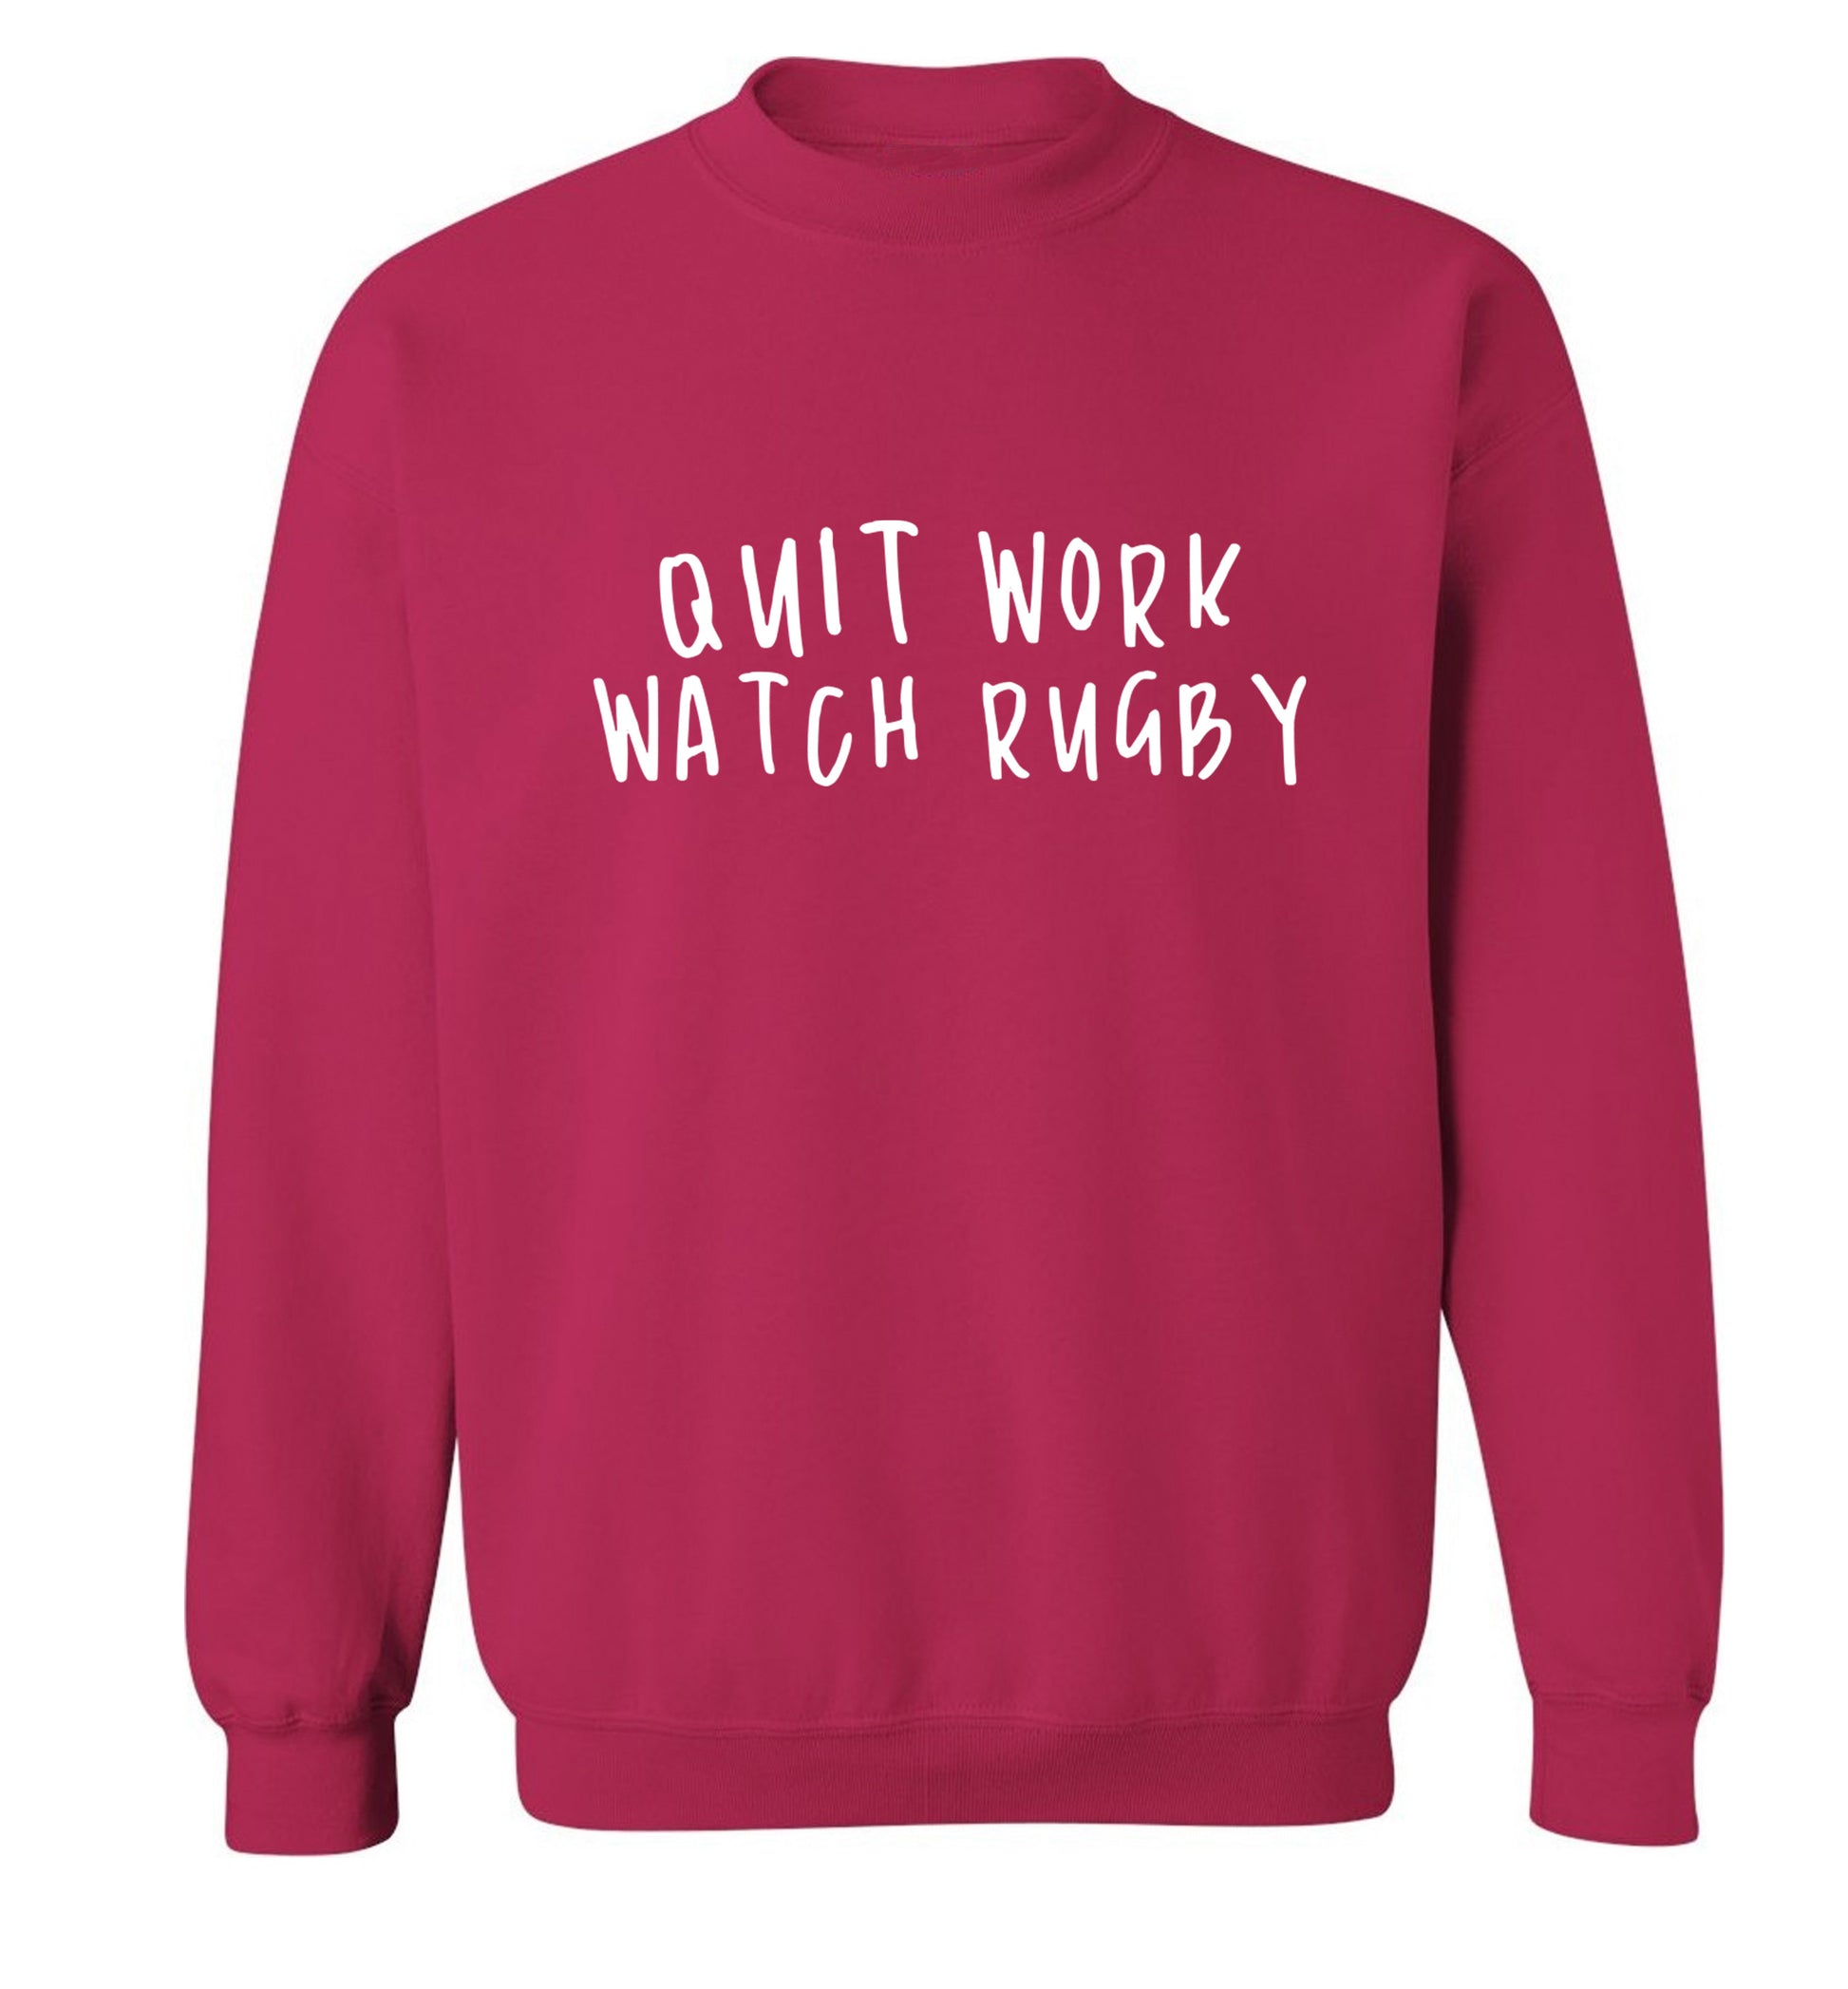 Quit work watch rugby Adult's unisex pink Sweater 2XL